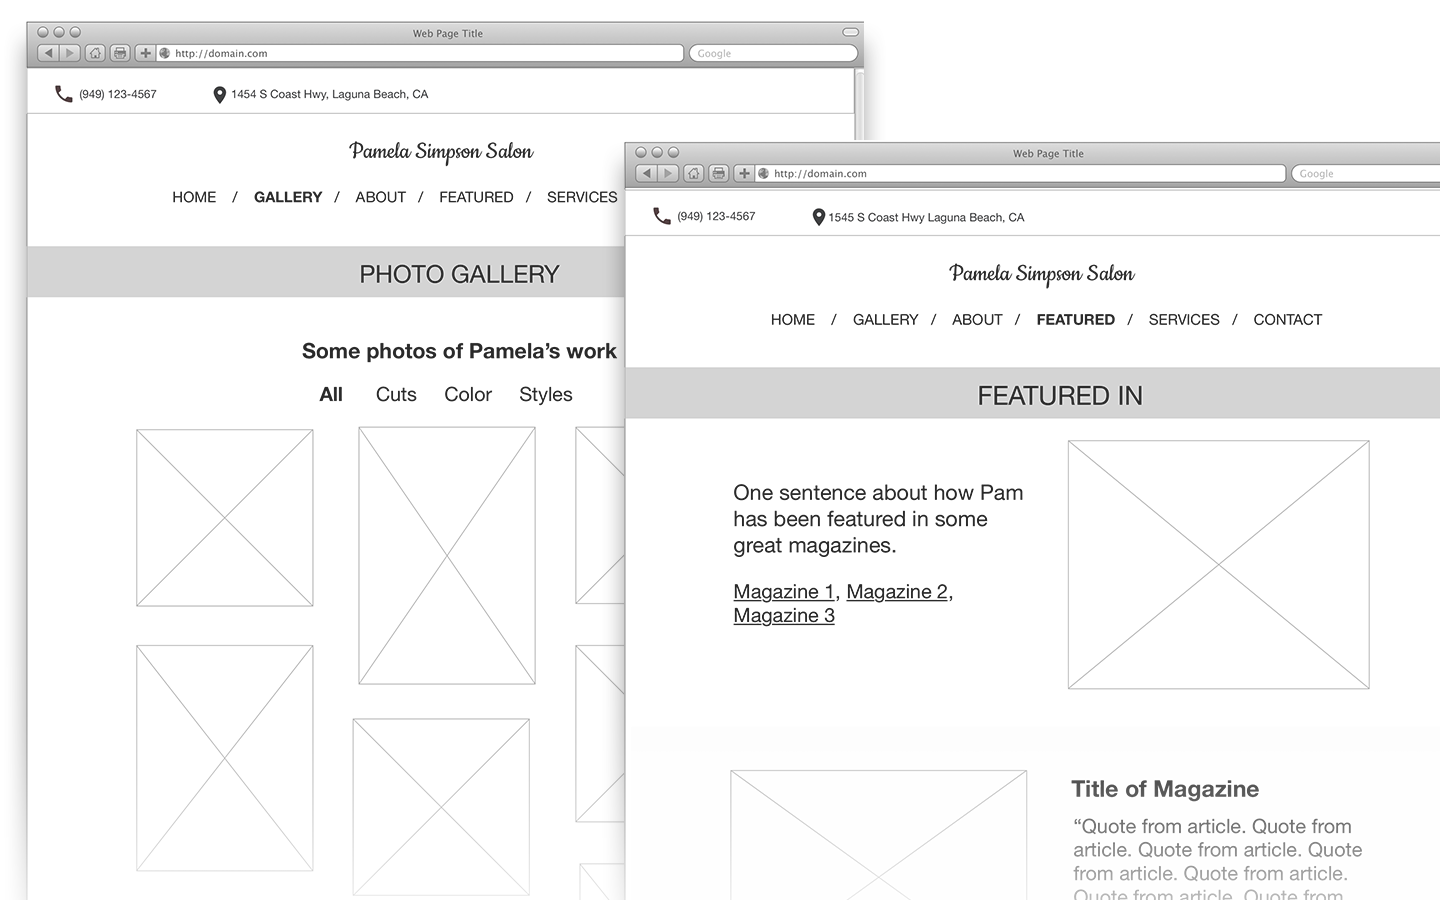 The wireframes that I created for this project